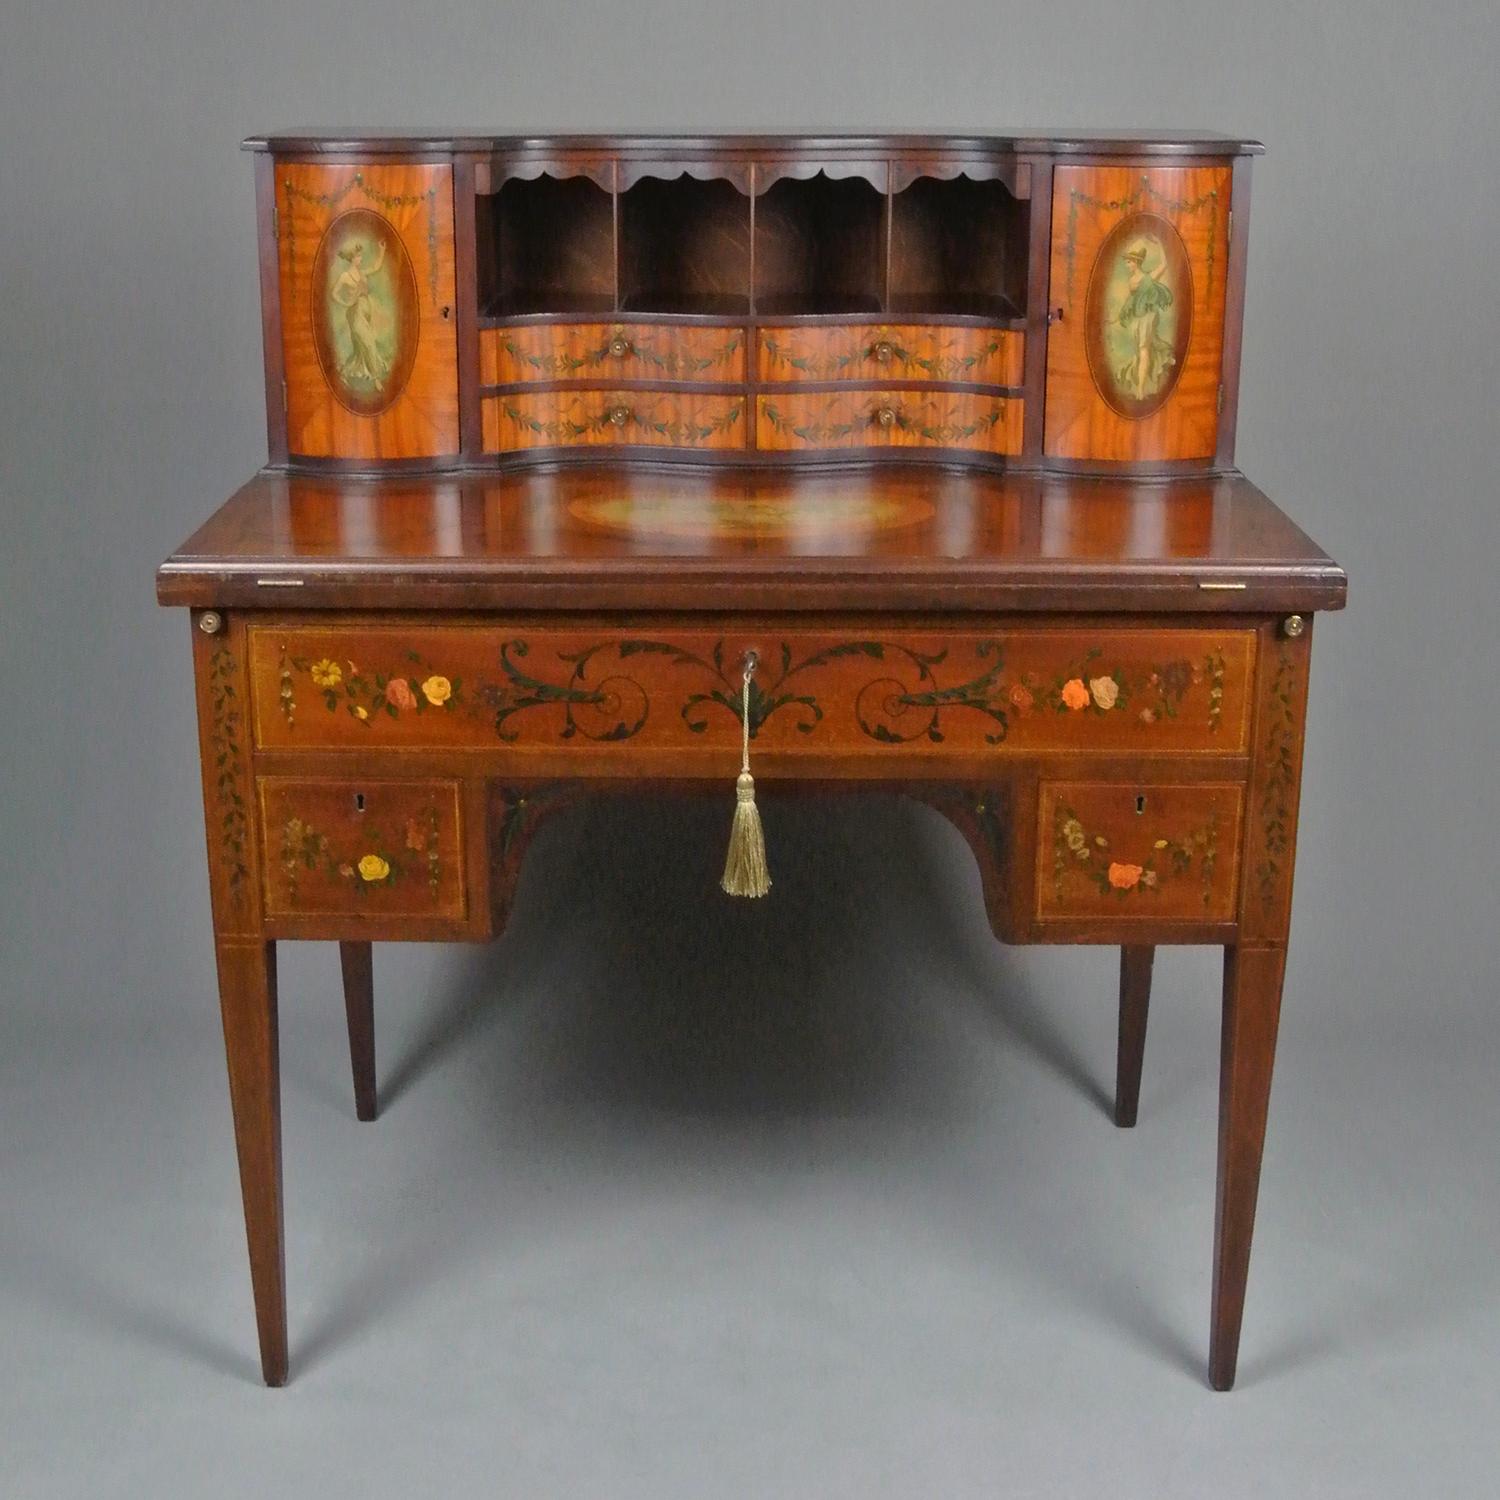 A very fine quality writing desk of Sheraton design in mahogany and satinwood with well shaped upper case and drawers and a fold out writing surface with original red velvet surface set within a beautiful kingwood and satinwood border.

The desk